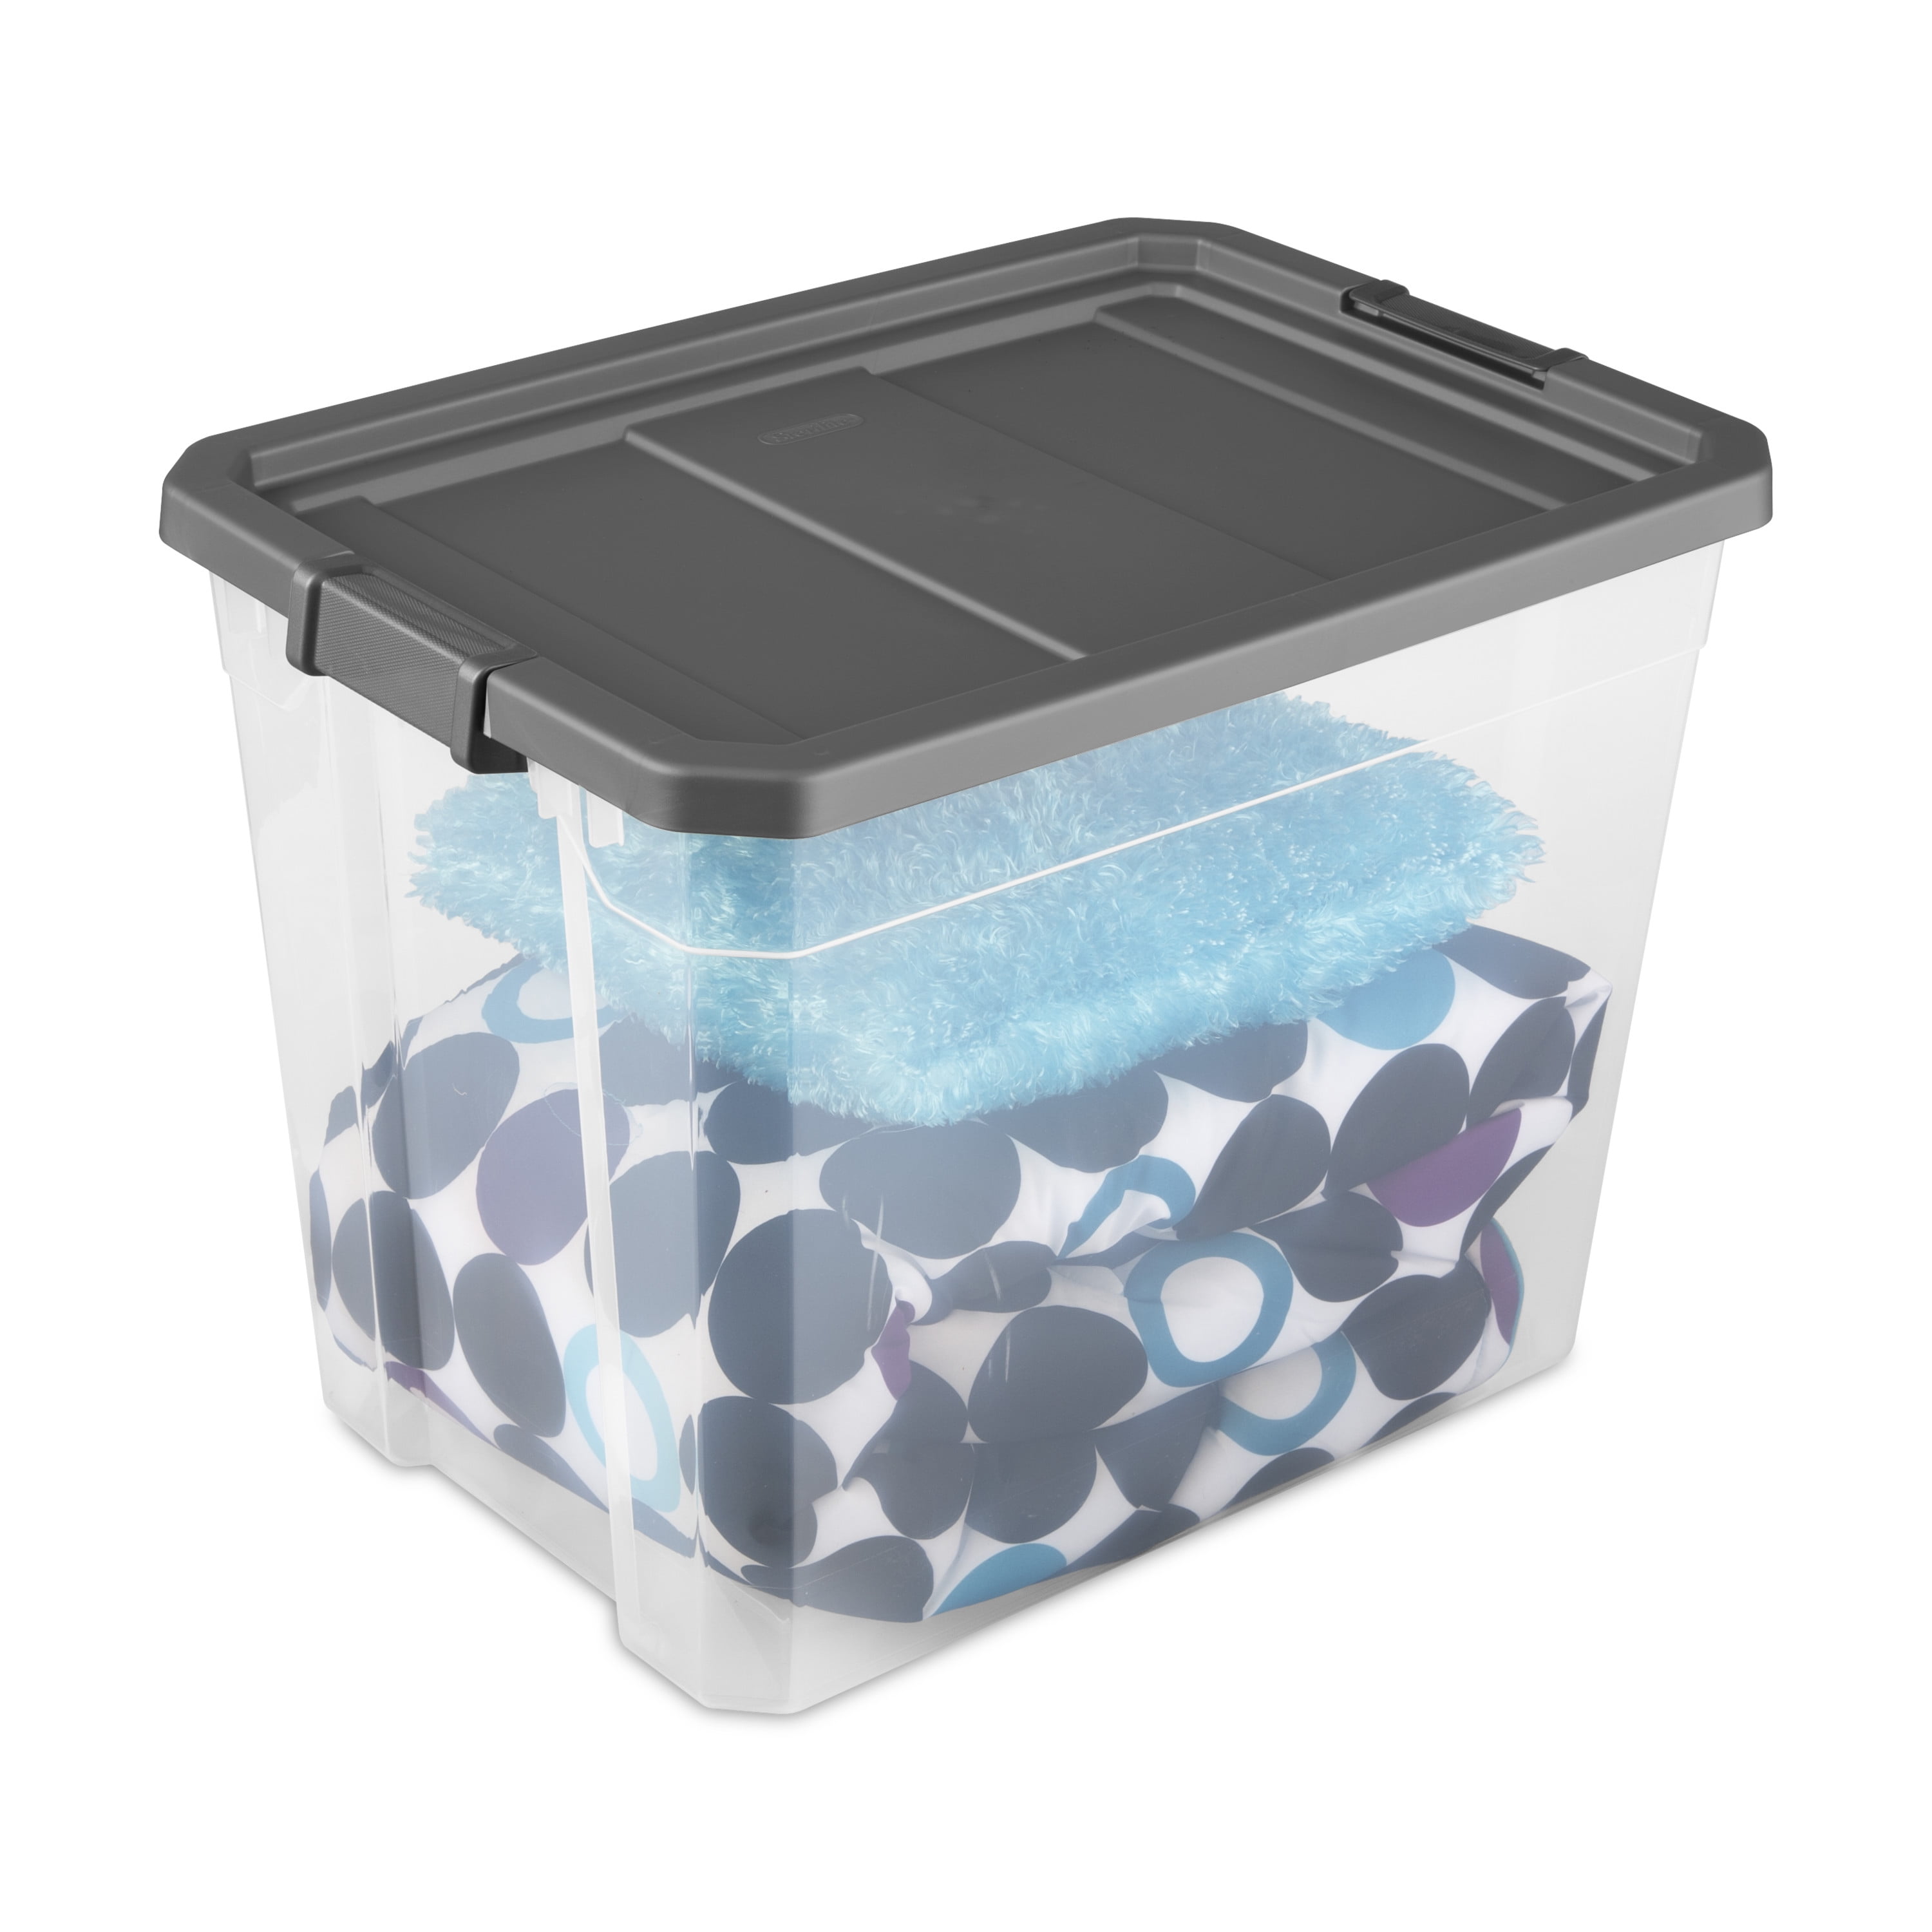 Sunware Small Modular Stacking Crate Grey, 15-7/8 x 9-3/4 x 10-1/4 H | The Container Store